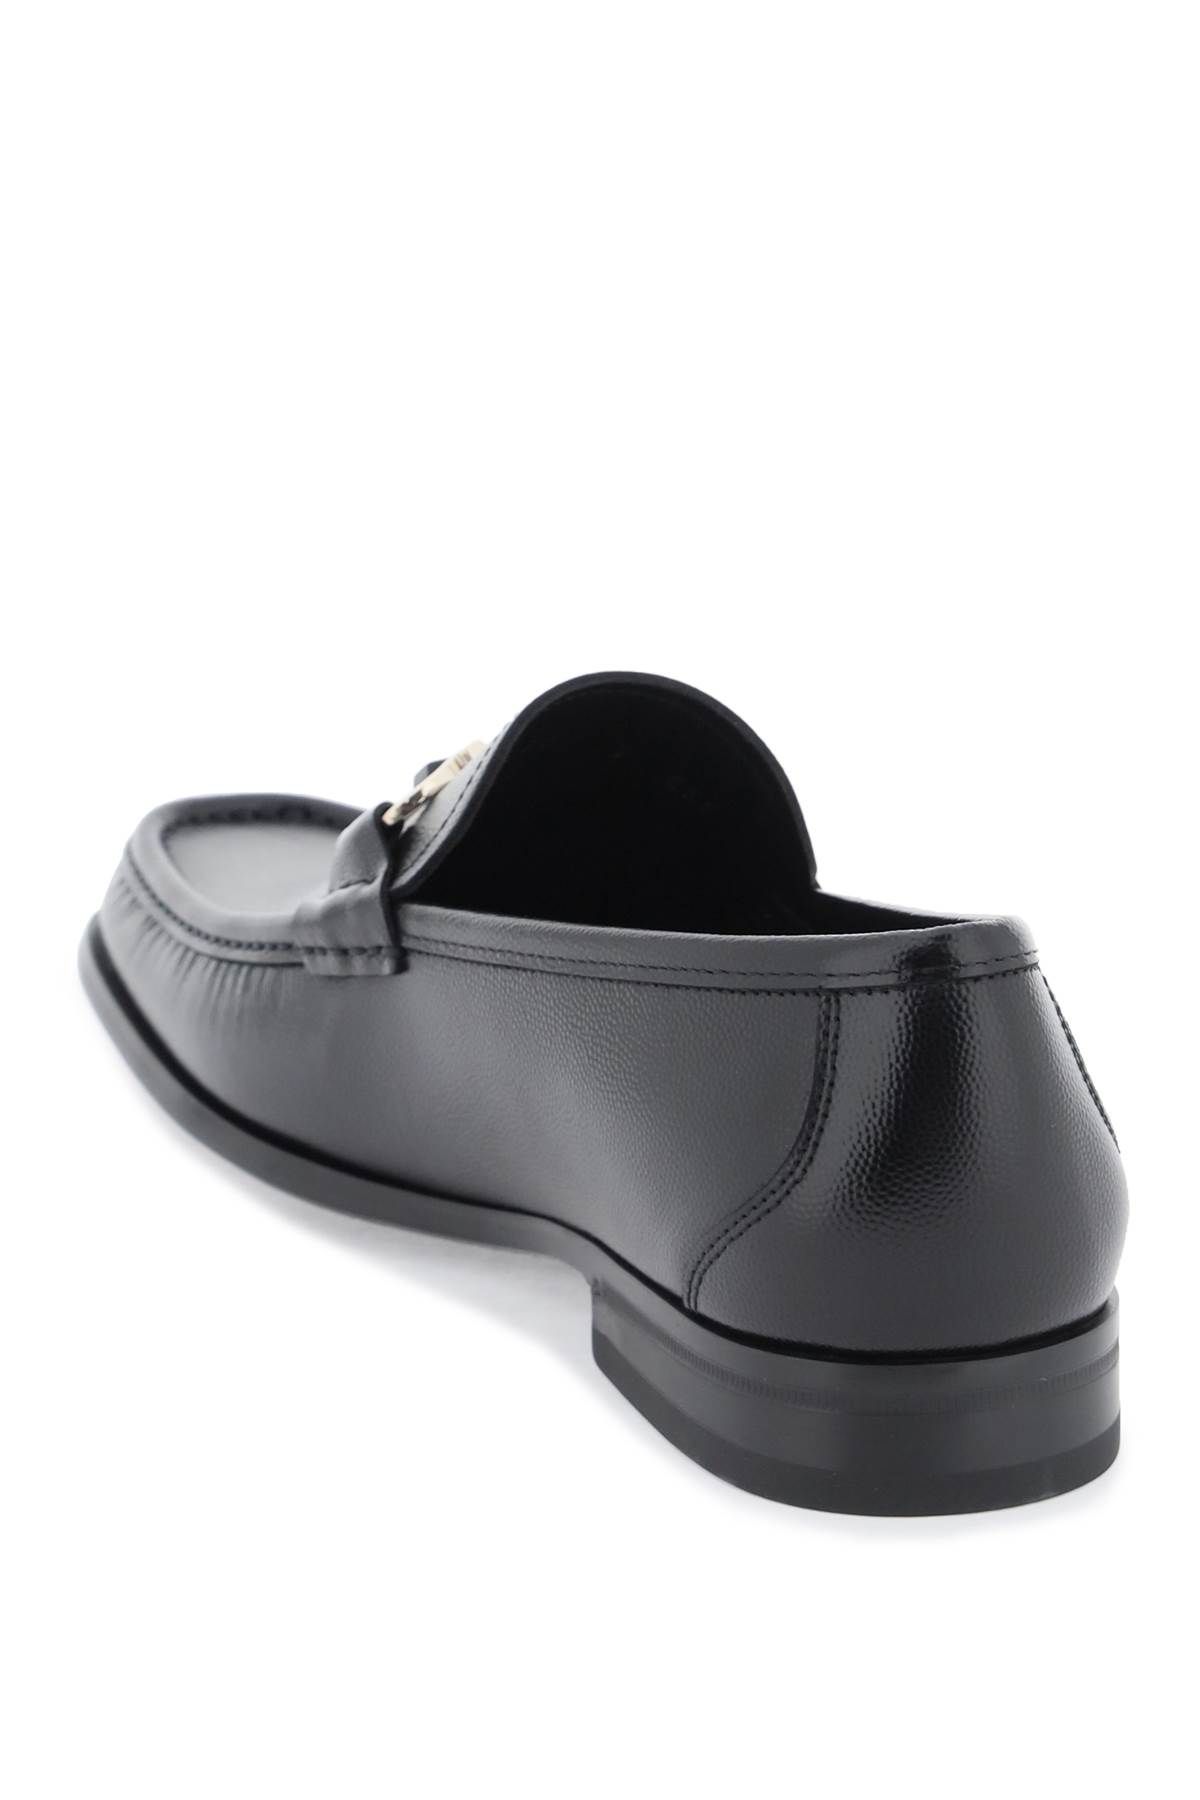 Shop Ferragamo Grained Leather Loafers With Gancini In Black